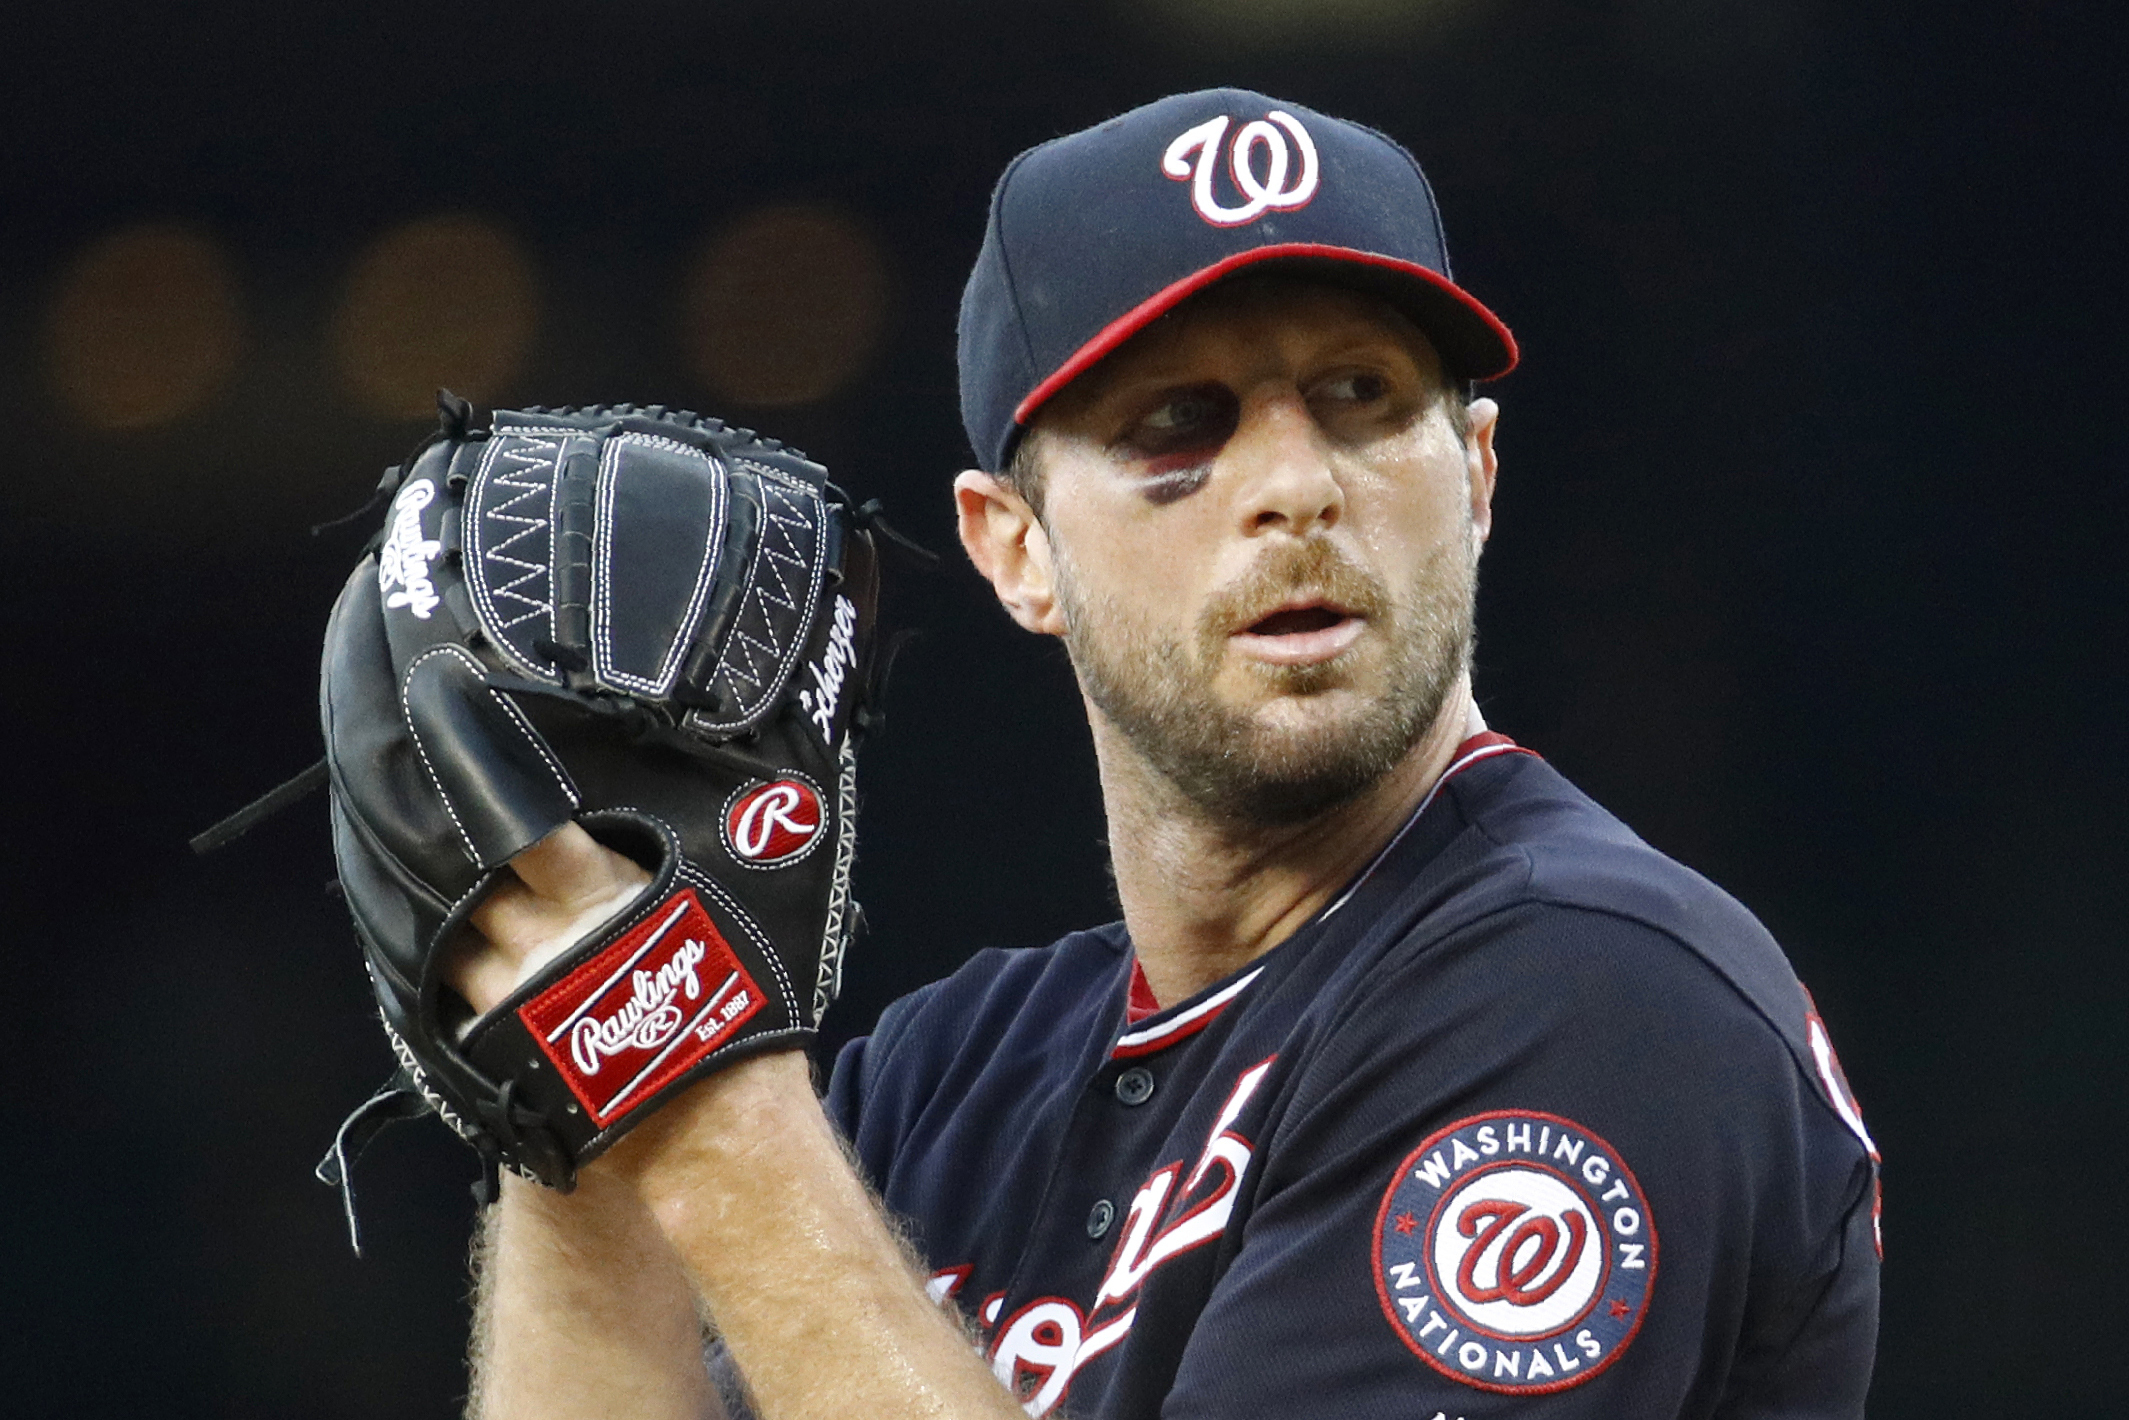 Nationals' Max Scherzer on injury: 'I couldn't get out of bed